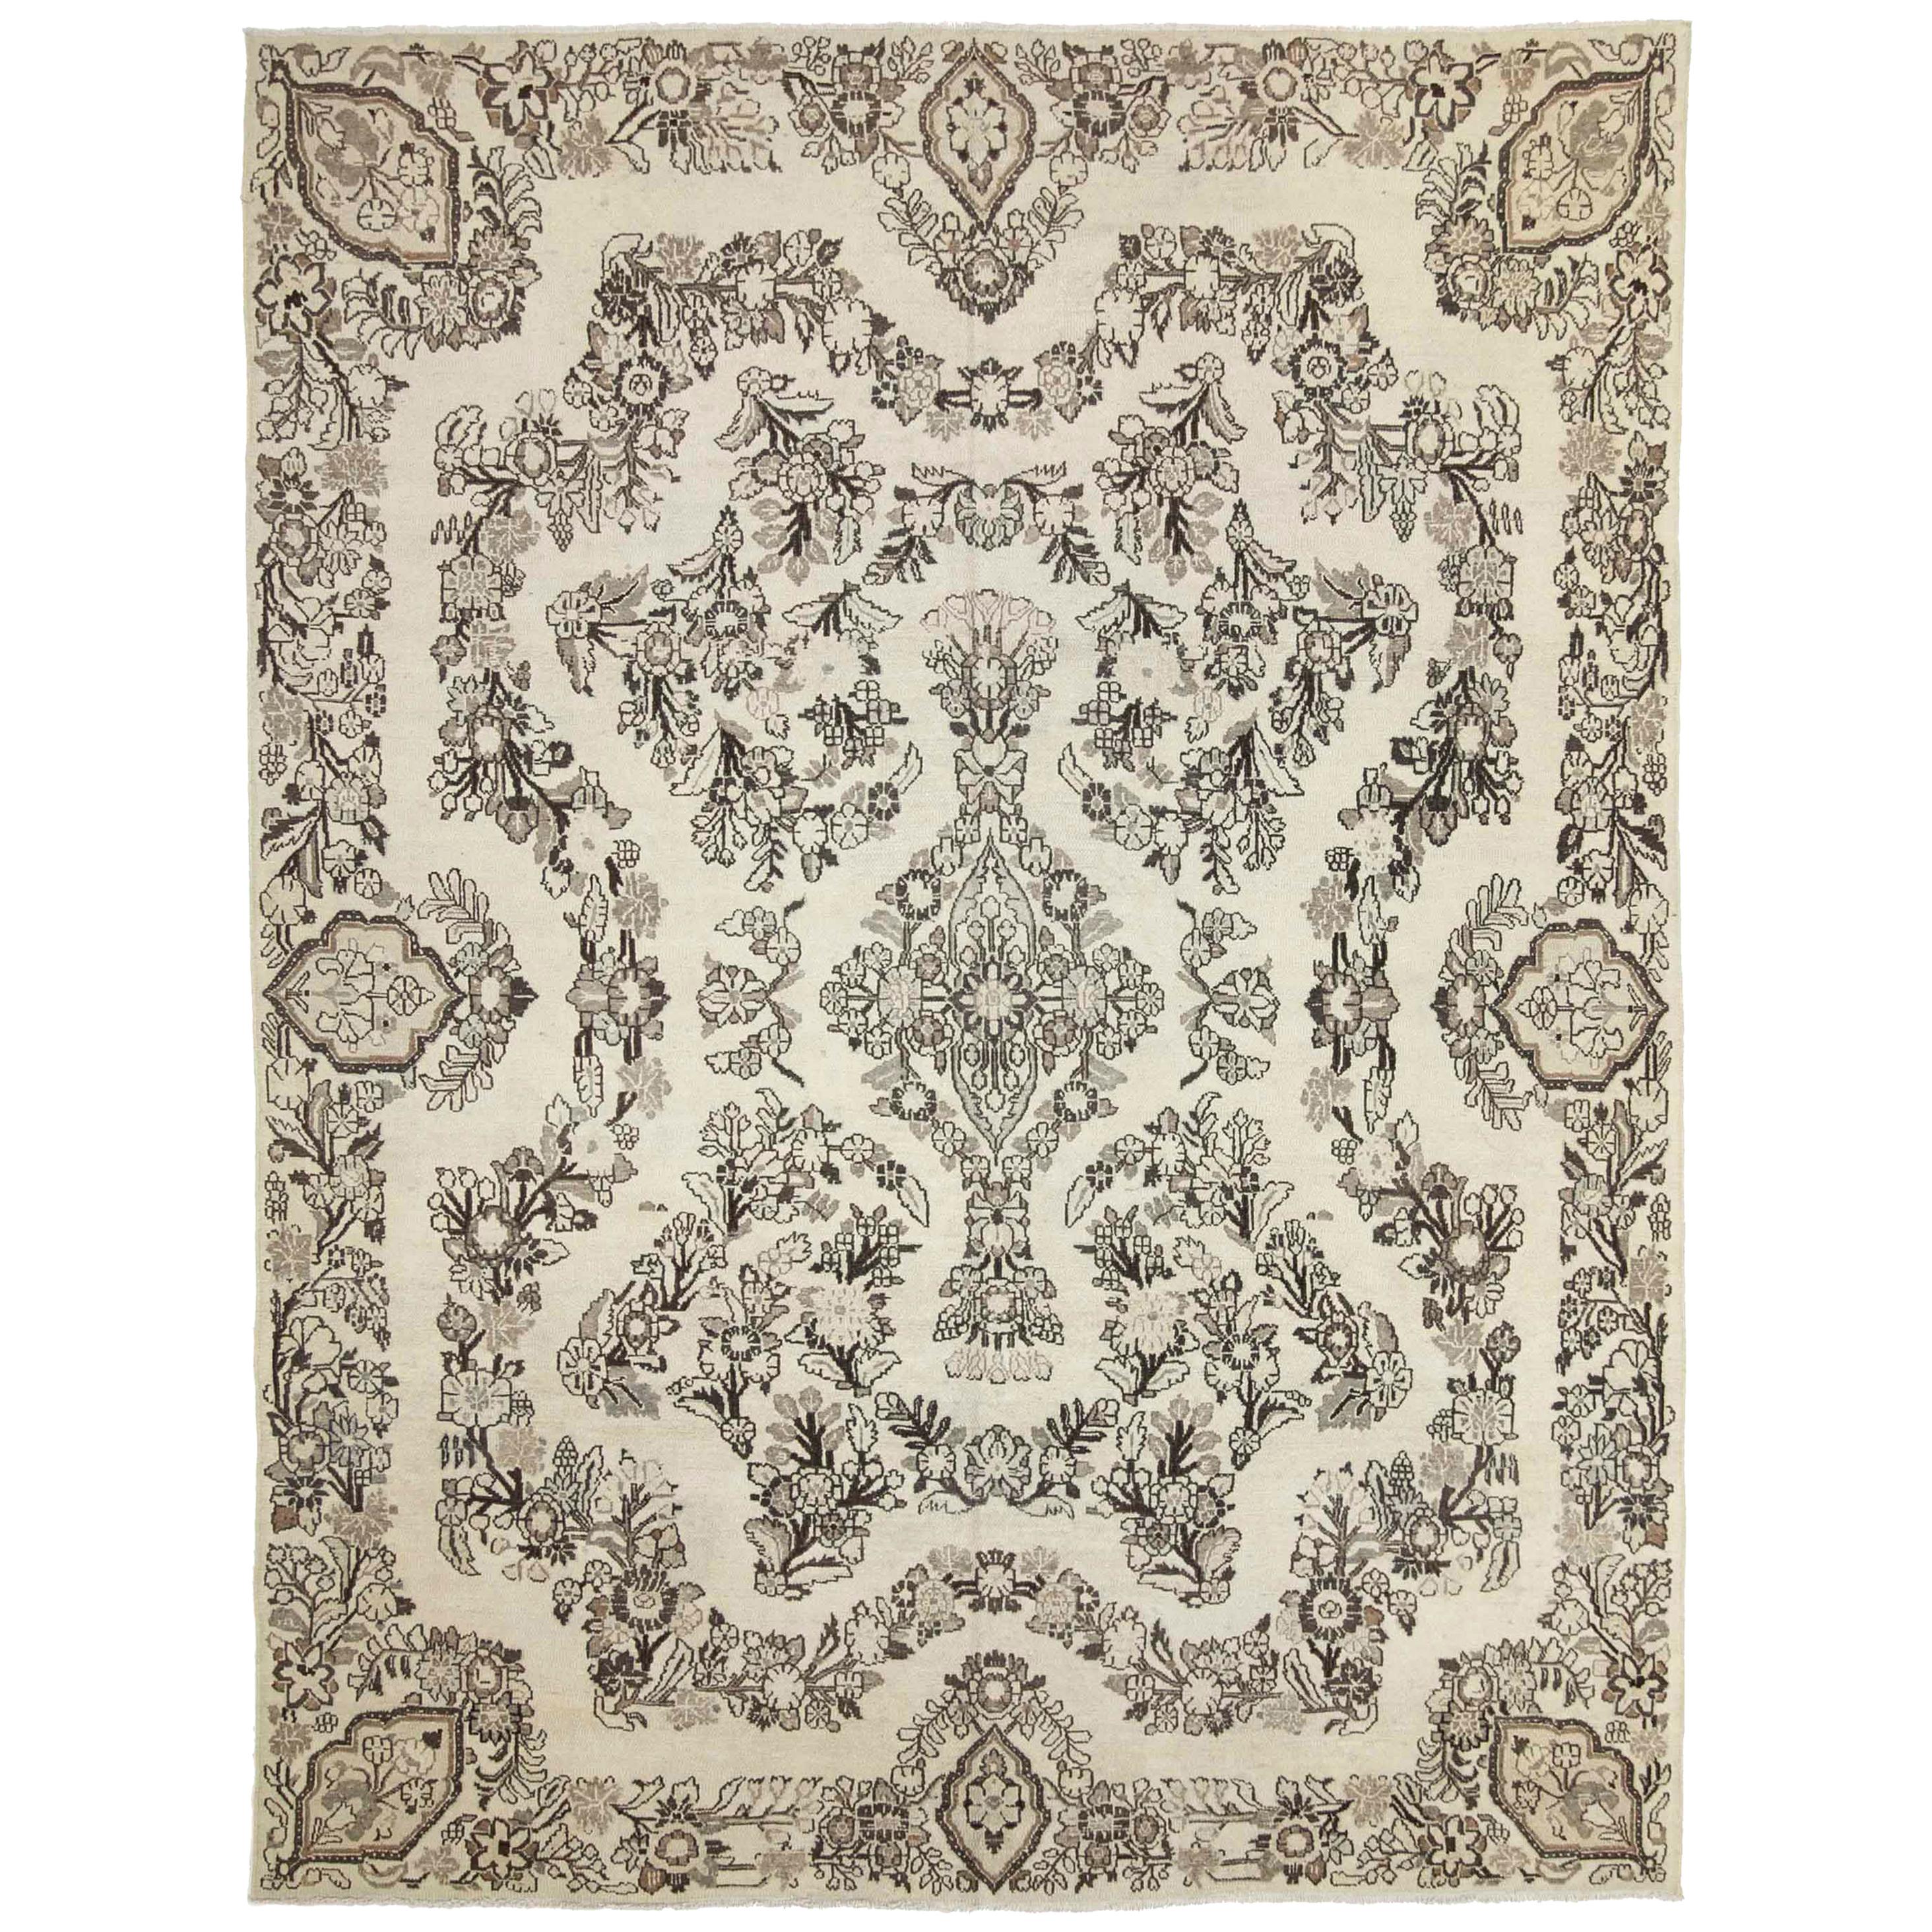 Antique Persian Malayer Rug with Botanical Details on an Ivory Field